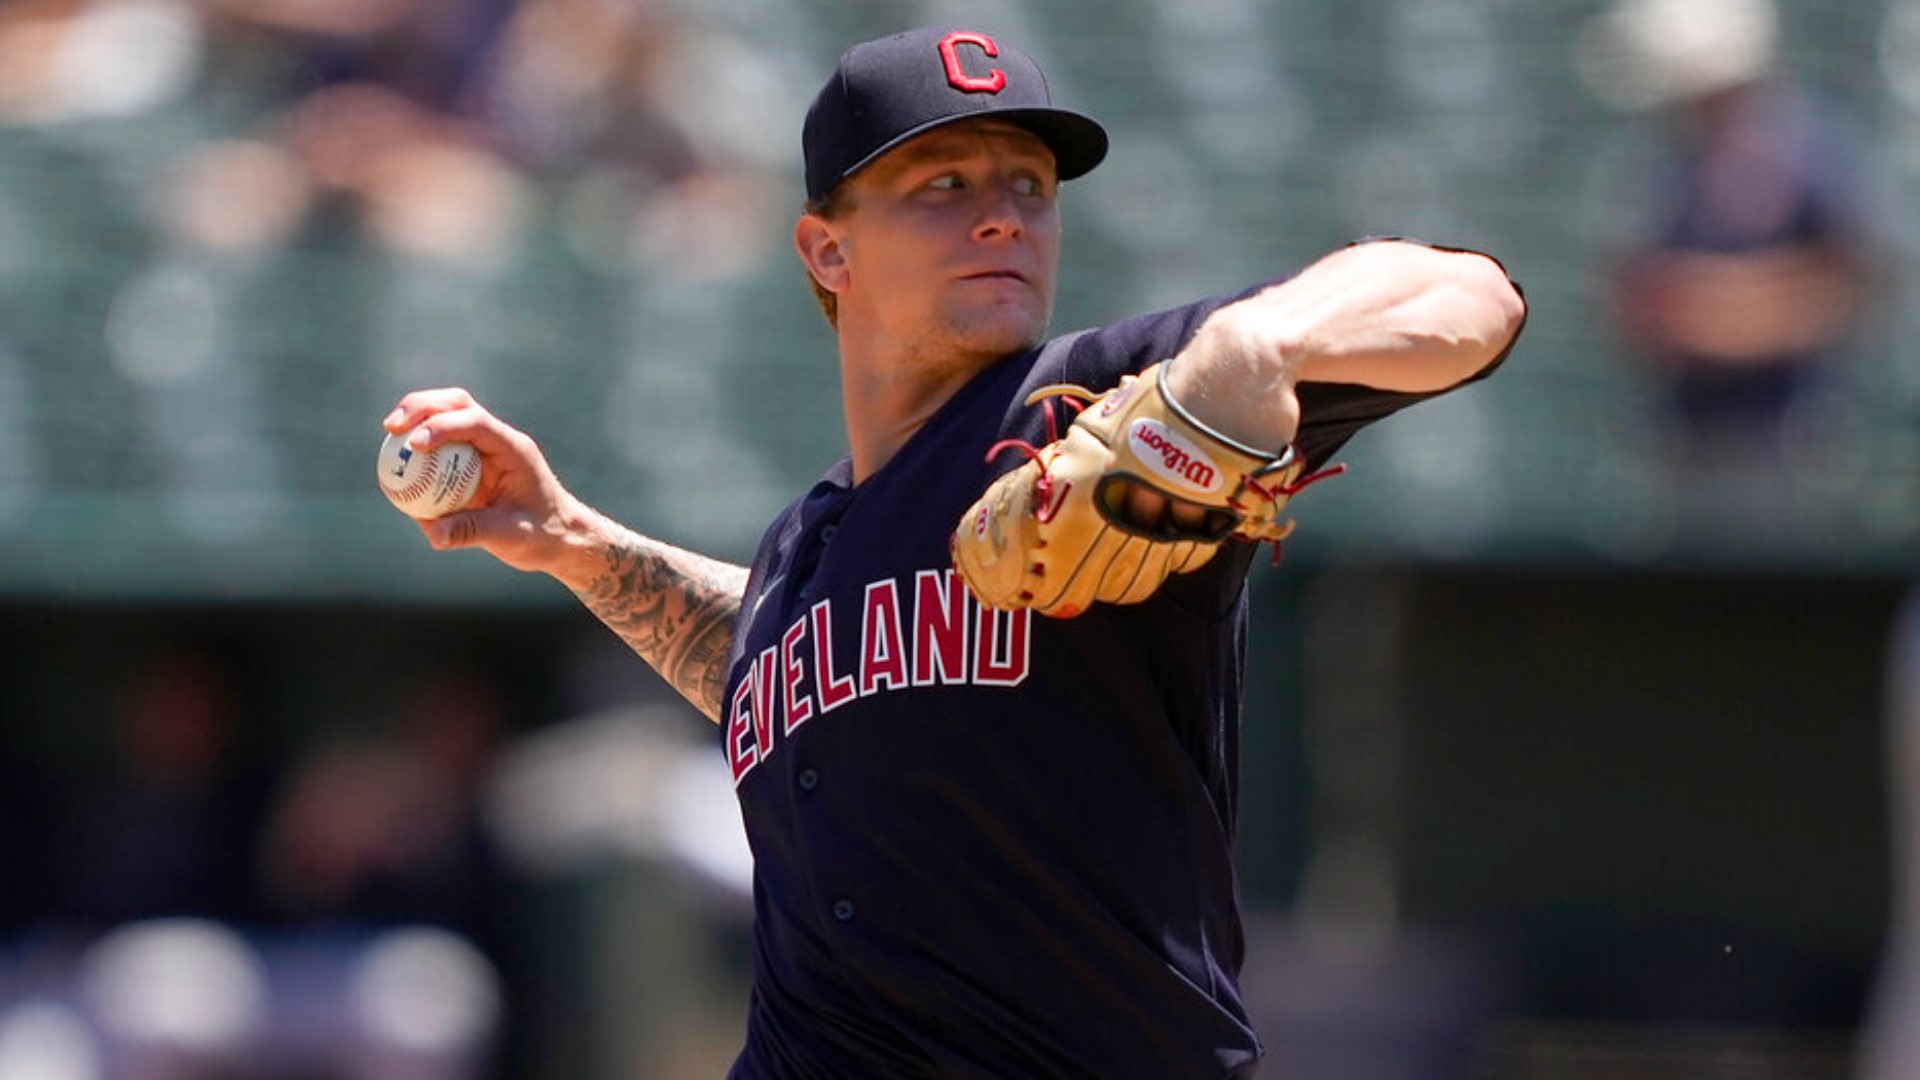 Did you know Cleveland Indians pitcher Zach Plesac has a twin brother? He tells all in this new 'Beyond the Dugout' interview with 3News' Dave Chudowsky.